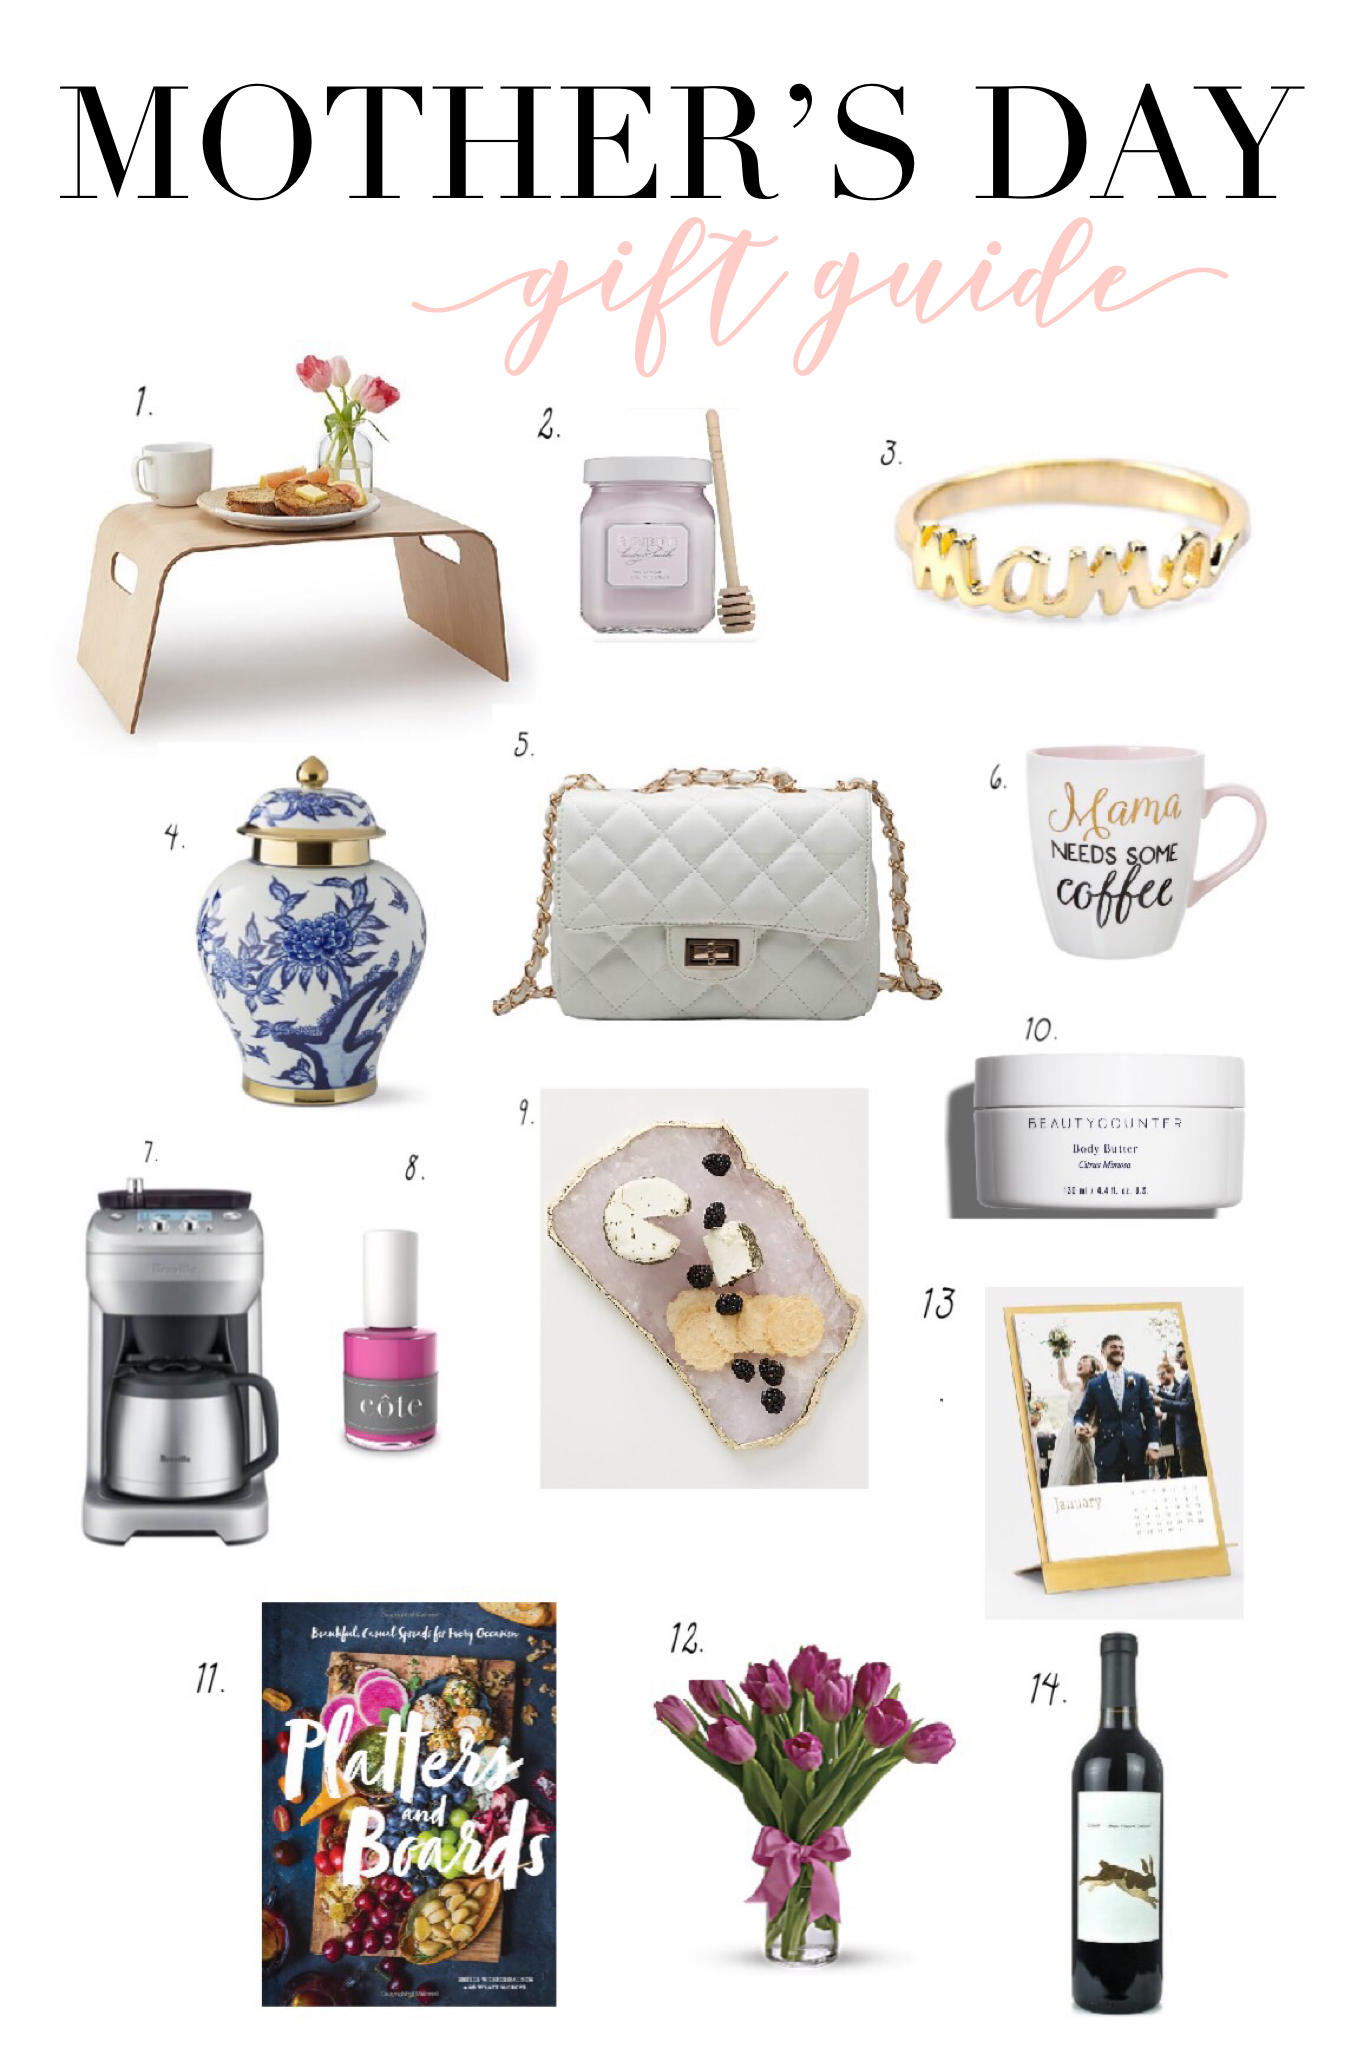 mother's day gift gift guide. gifts for mom. gifts for her. Gifts for new moms